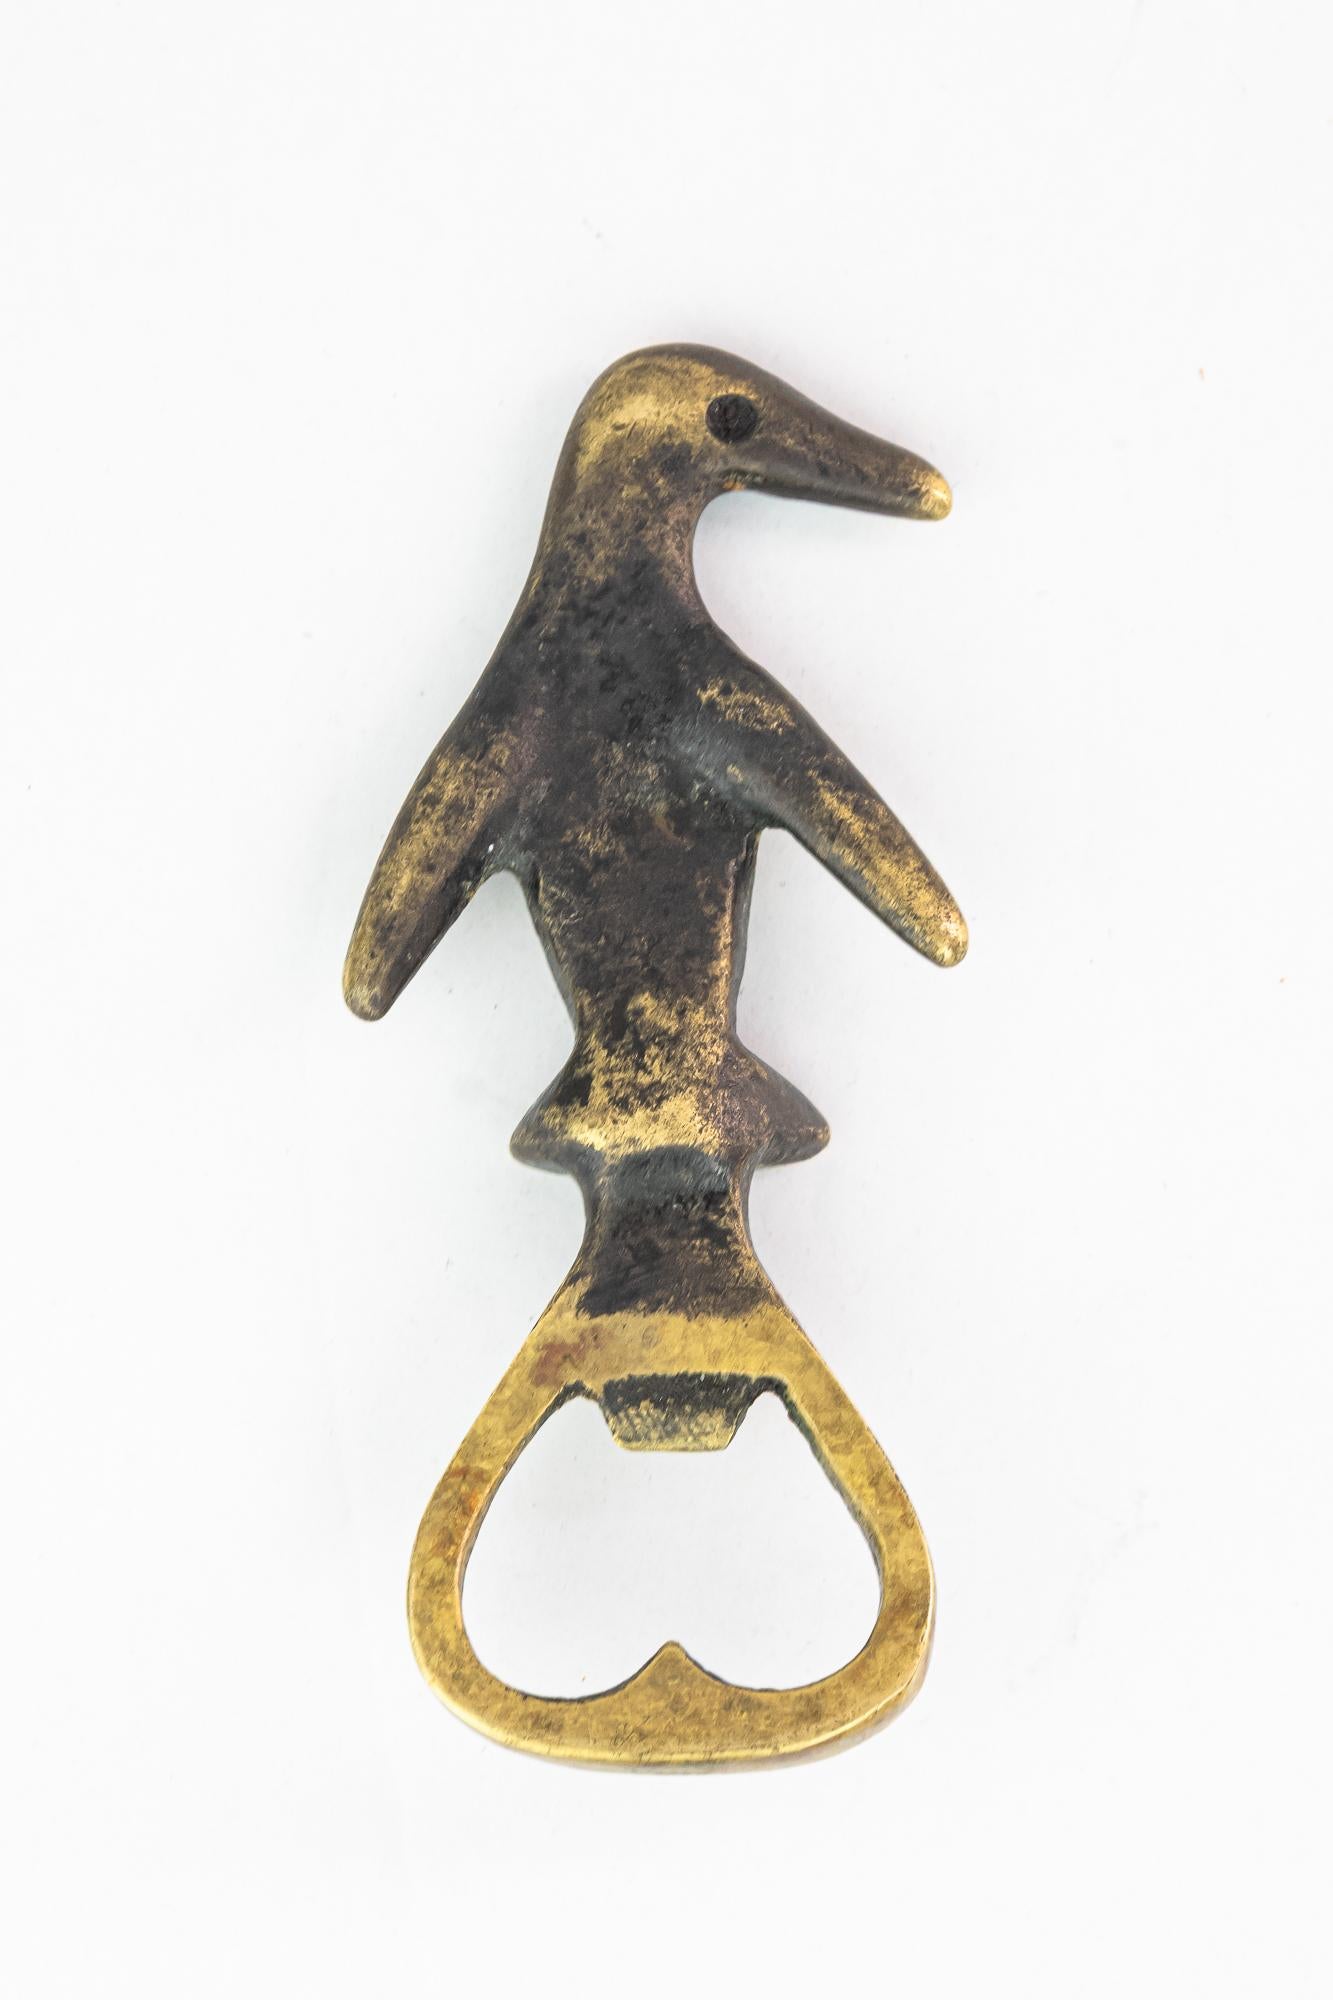 Bottle opener shows an penguin by Walter Bosse, circa 1950s
Original condition.